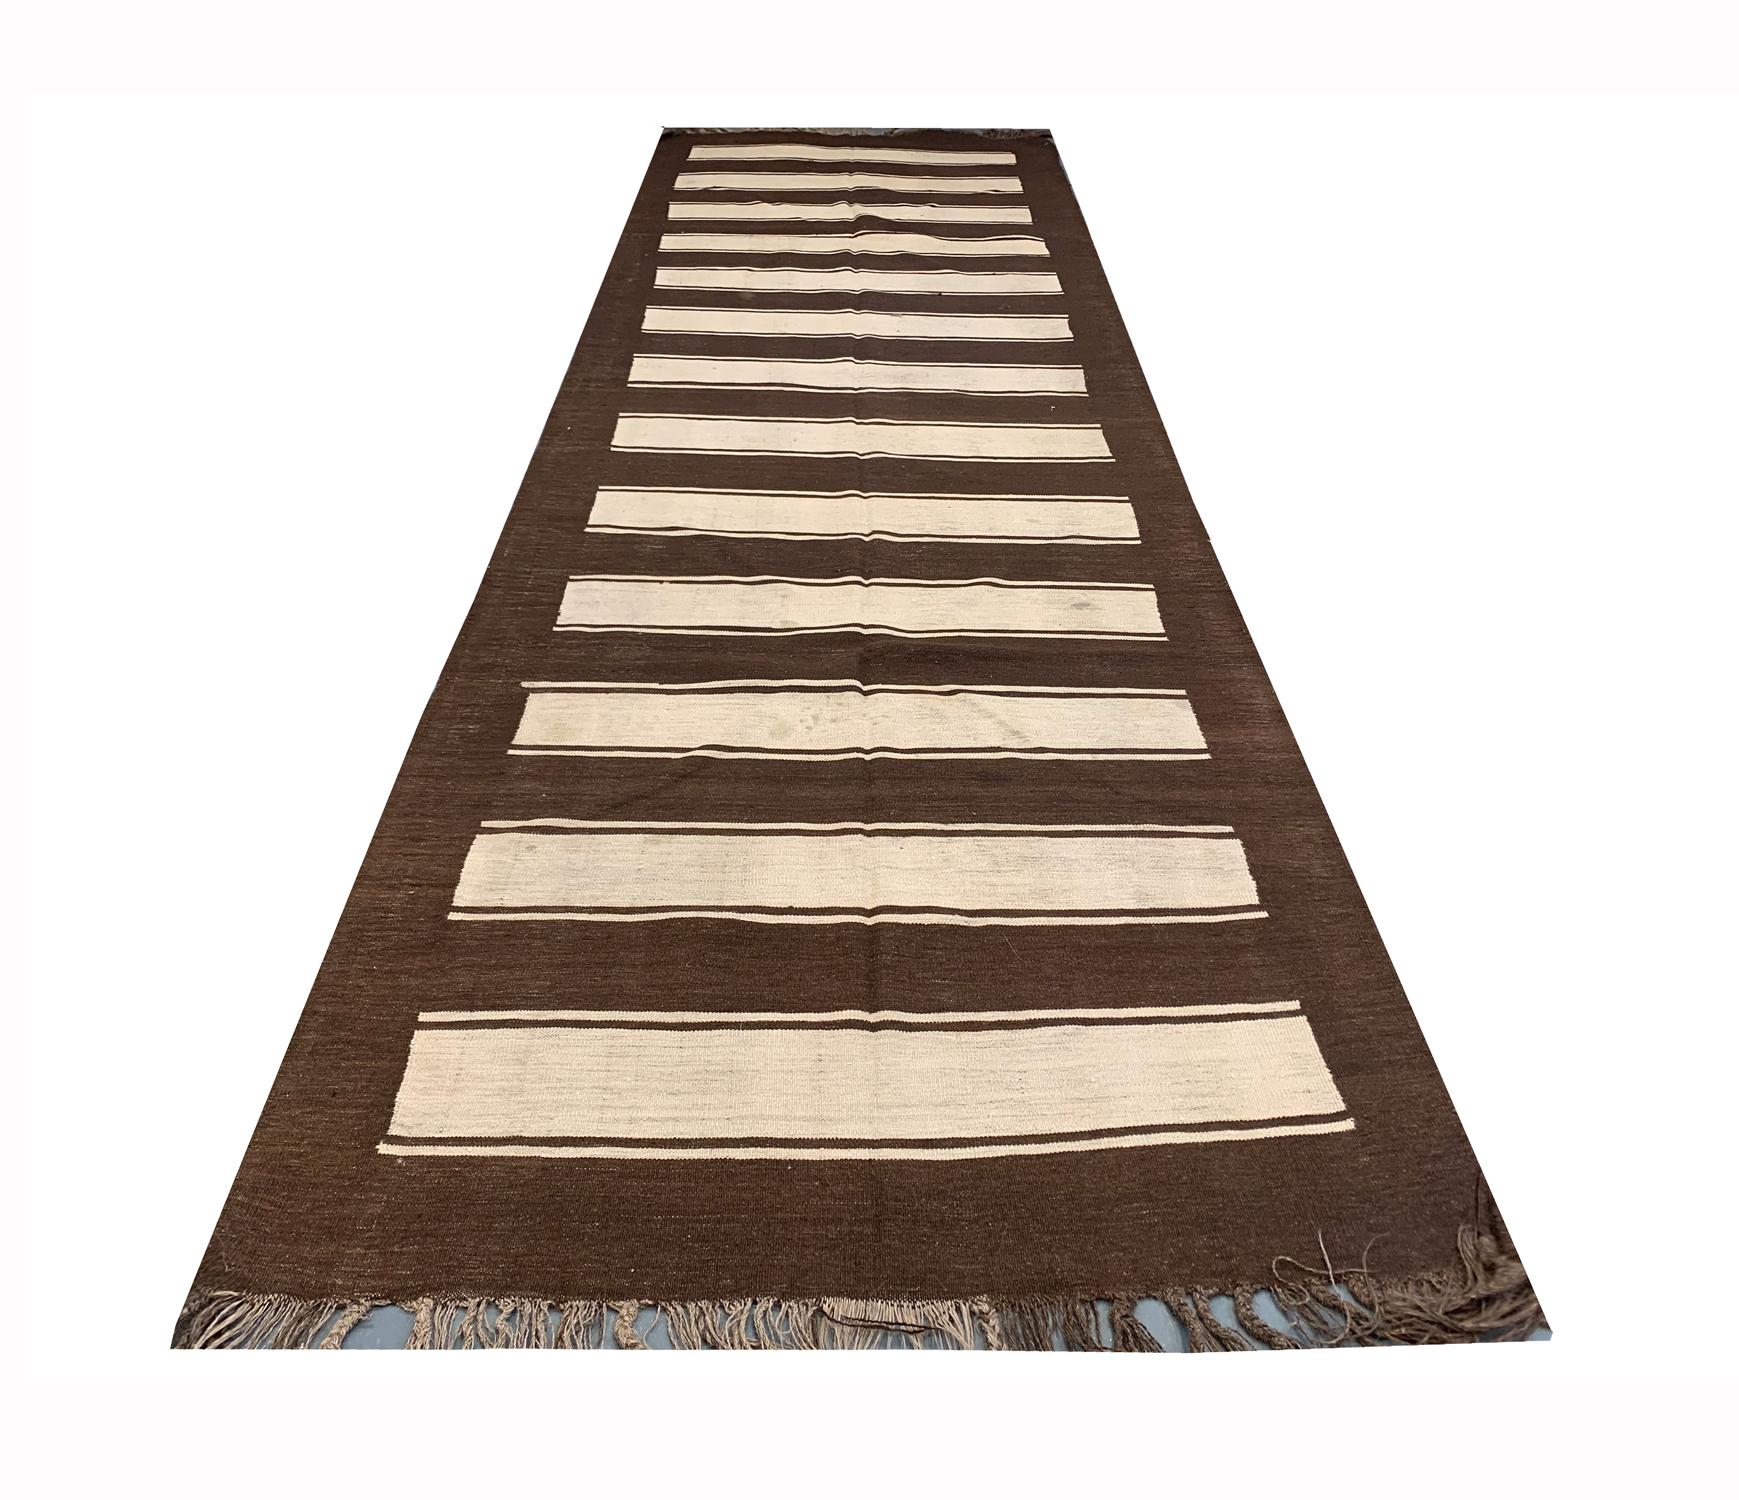 This fine hand woven wool area rug was woven in Afghanistan in 1900. The central design has been woven with a simple stripe design with a brown and cream colour palette. Both the colour and design in this piece make it the perfect accent piece. This